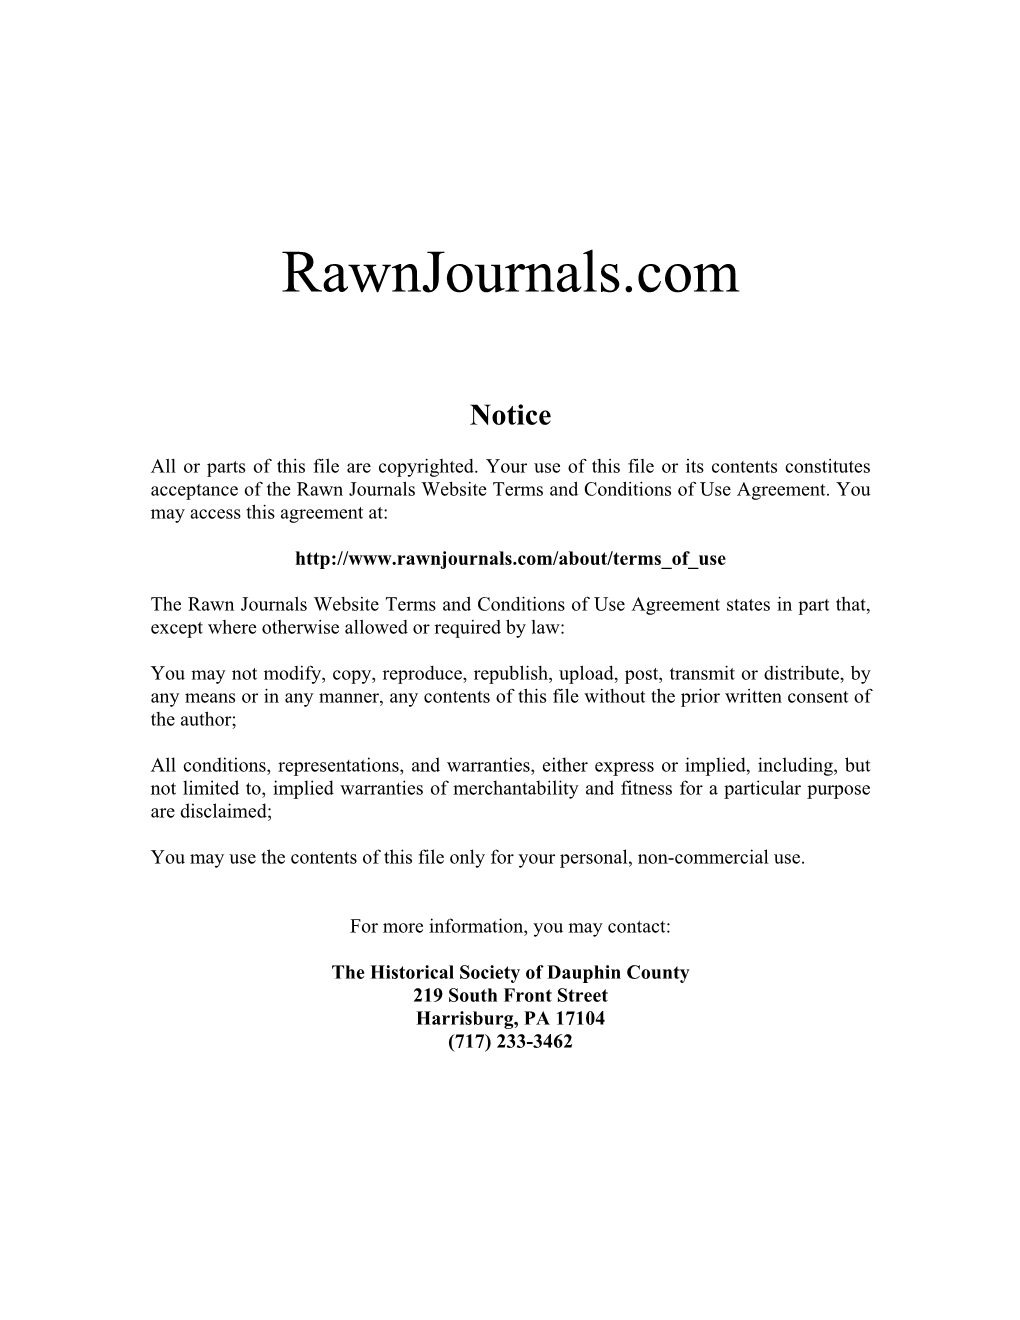 Introducing Charles Rawn, His Journals, and Their Editors